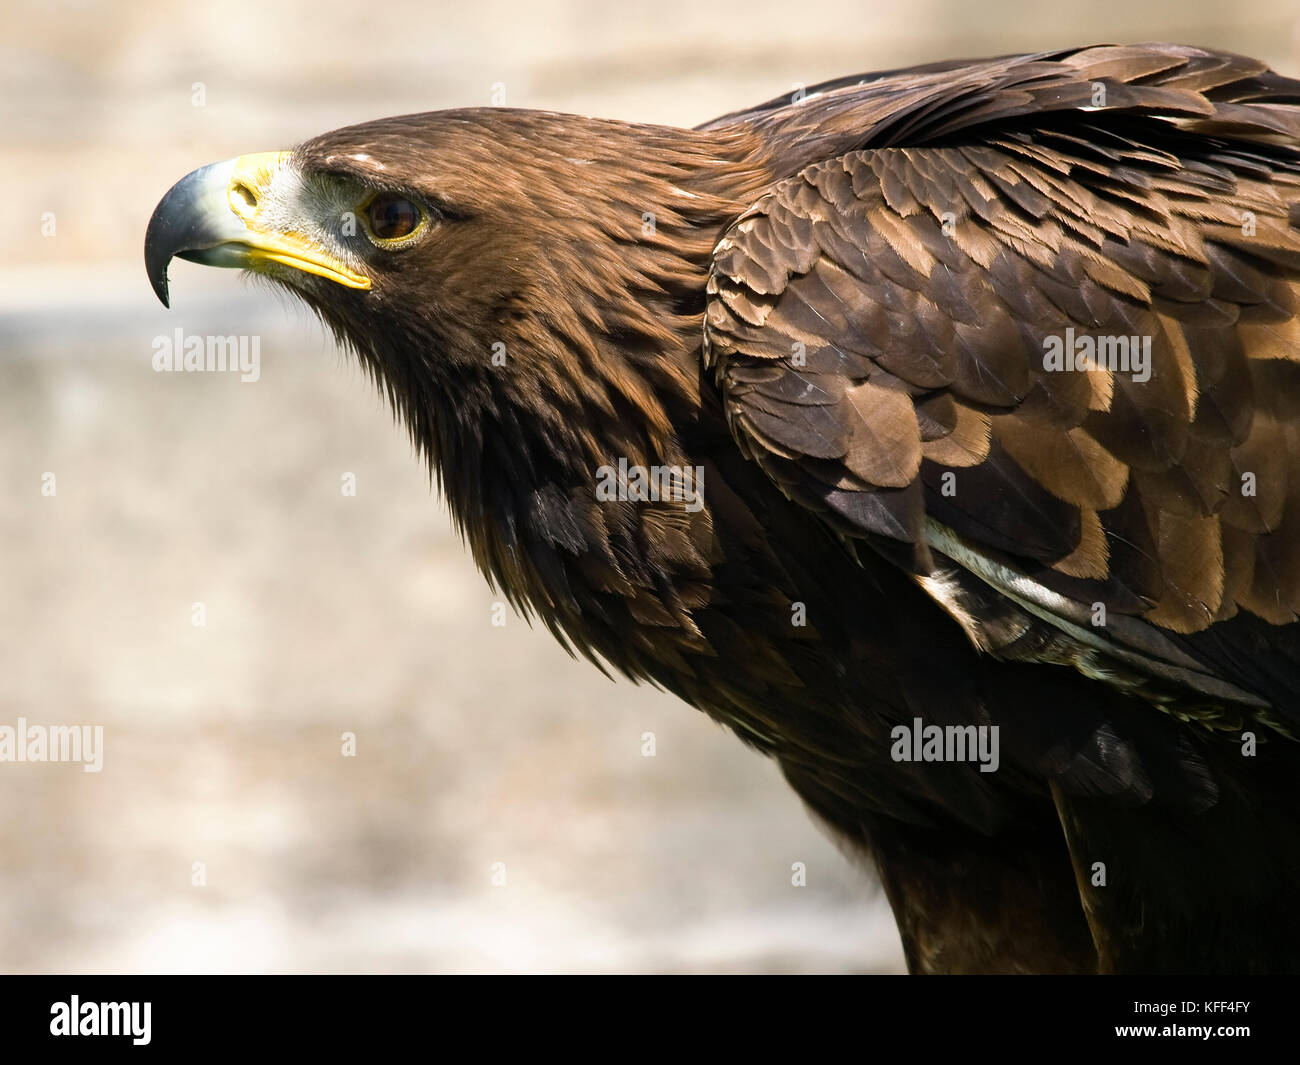 The Beautiful And Endangered Golden Eagle Or Aquila